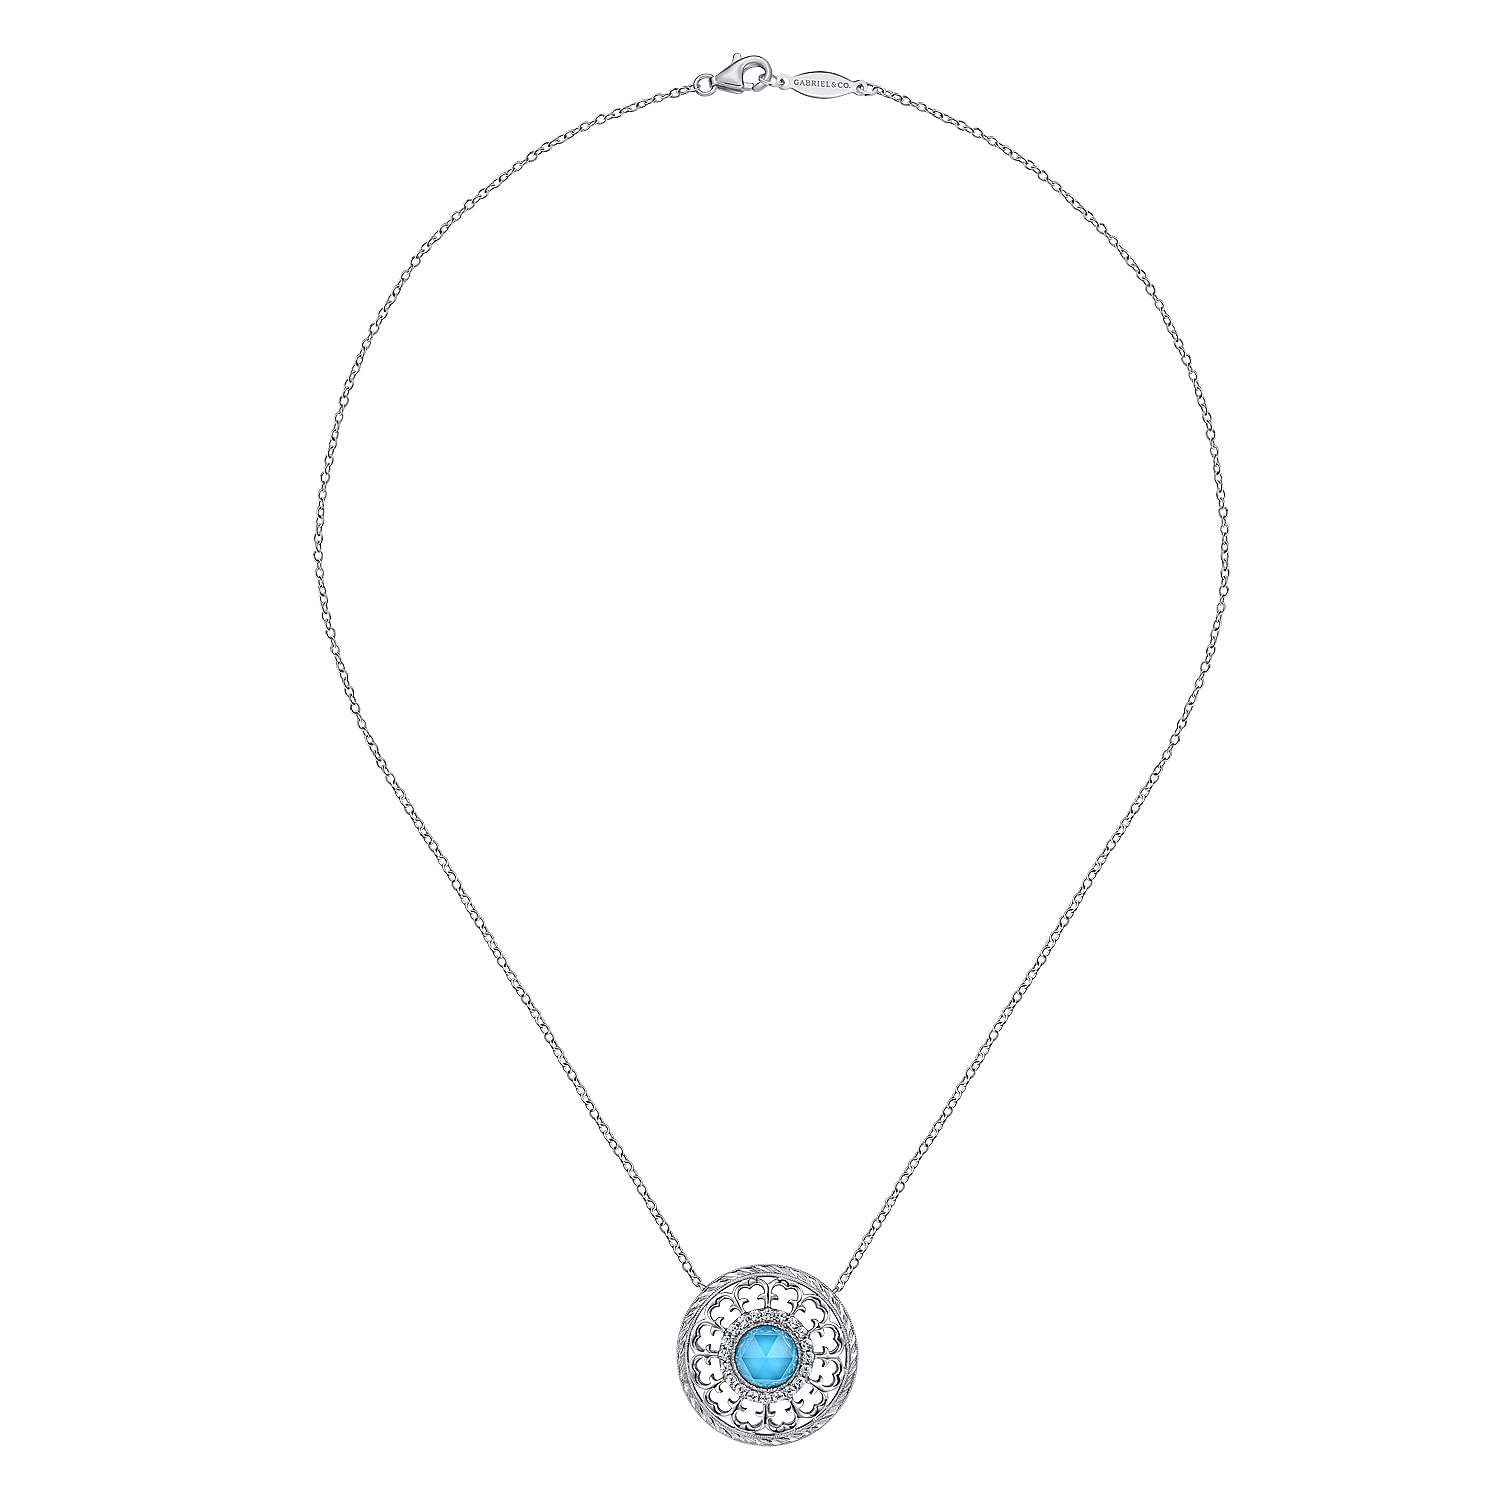 18 inch 925 Sterling Silver Round Rock Crystal and Turquoise Pendant Necklace with White Sapphire Halo